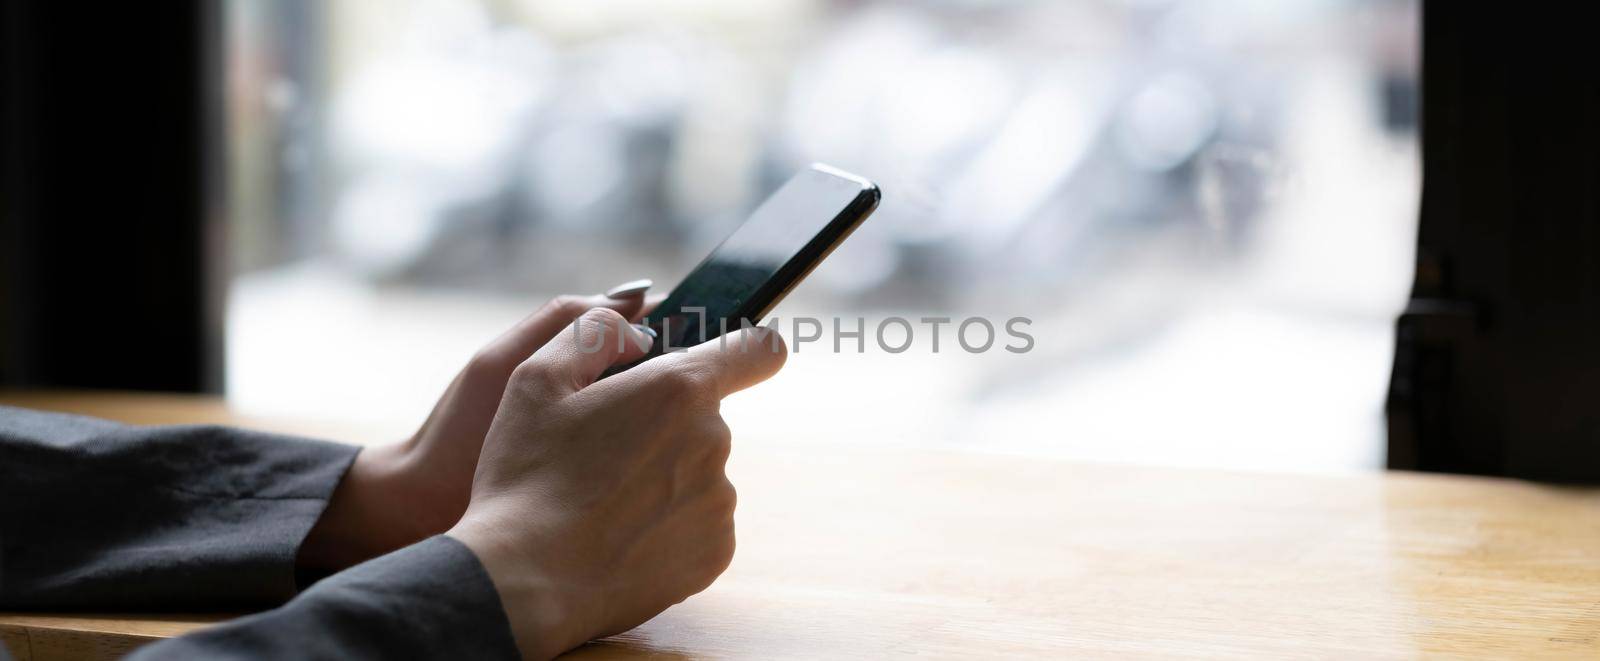 woman using apps on a mobile touchscreen smartphone. Concept for using technology, shopping online, mobile apps, texting, addiction, swipe up, swipe down. by wichayada